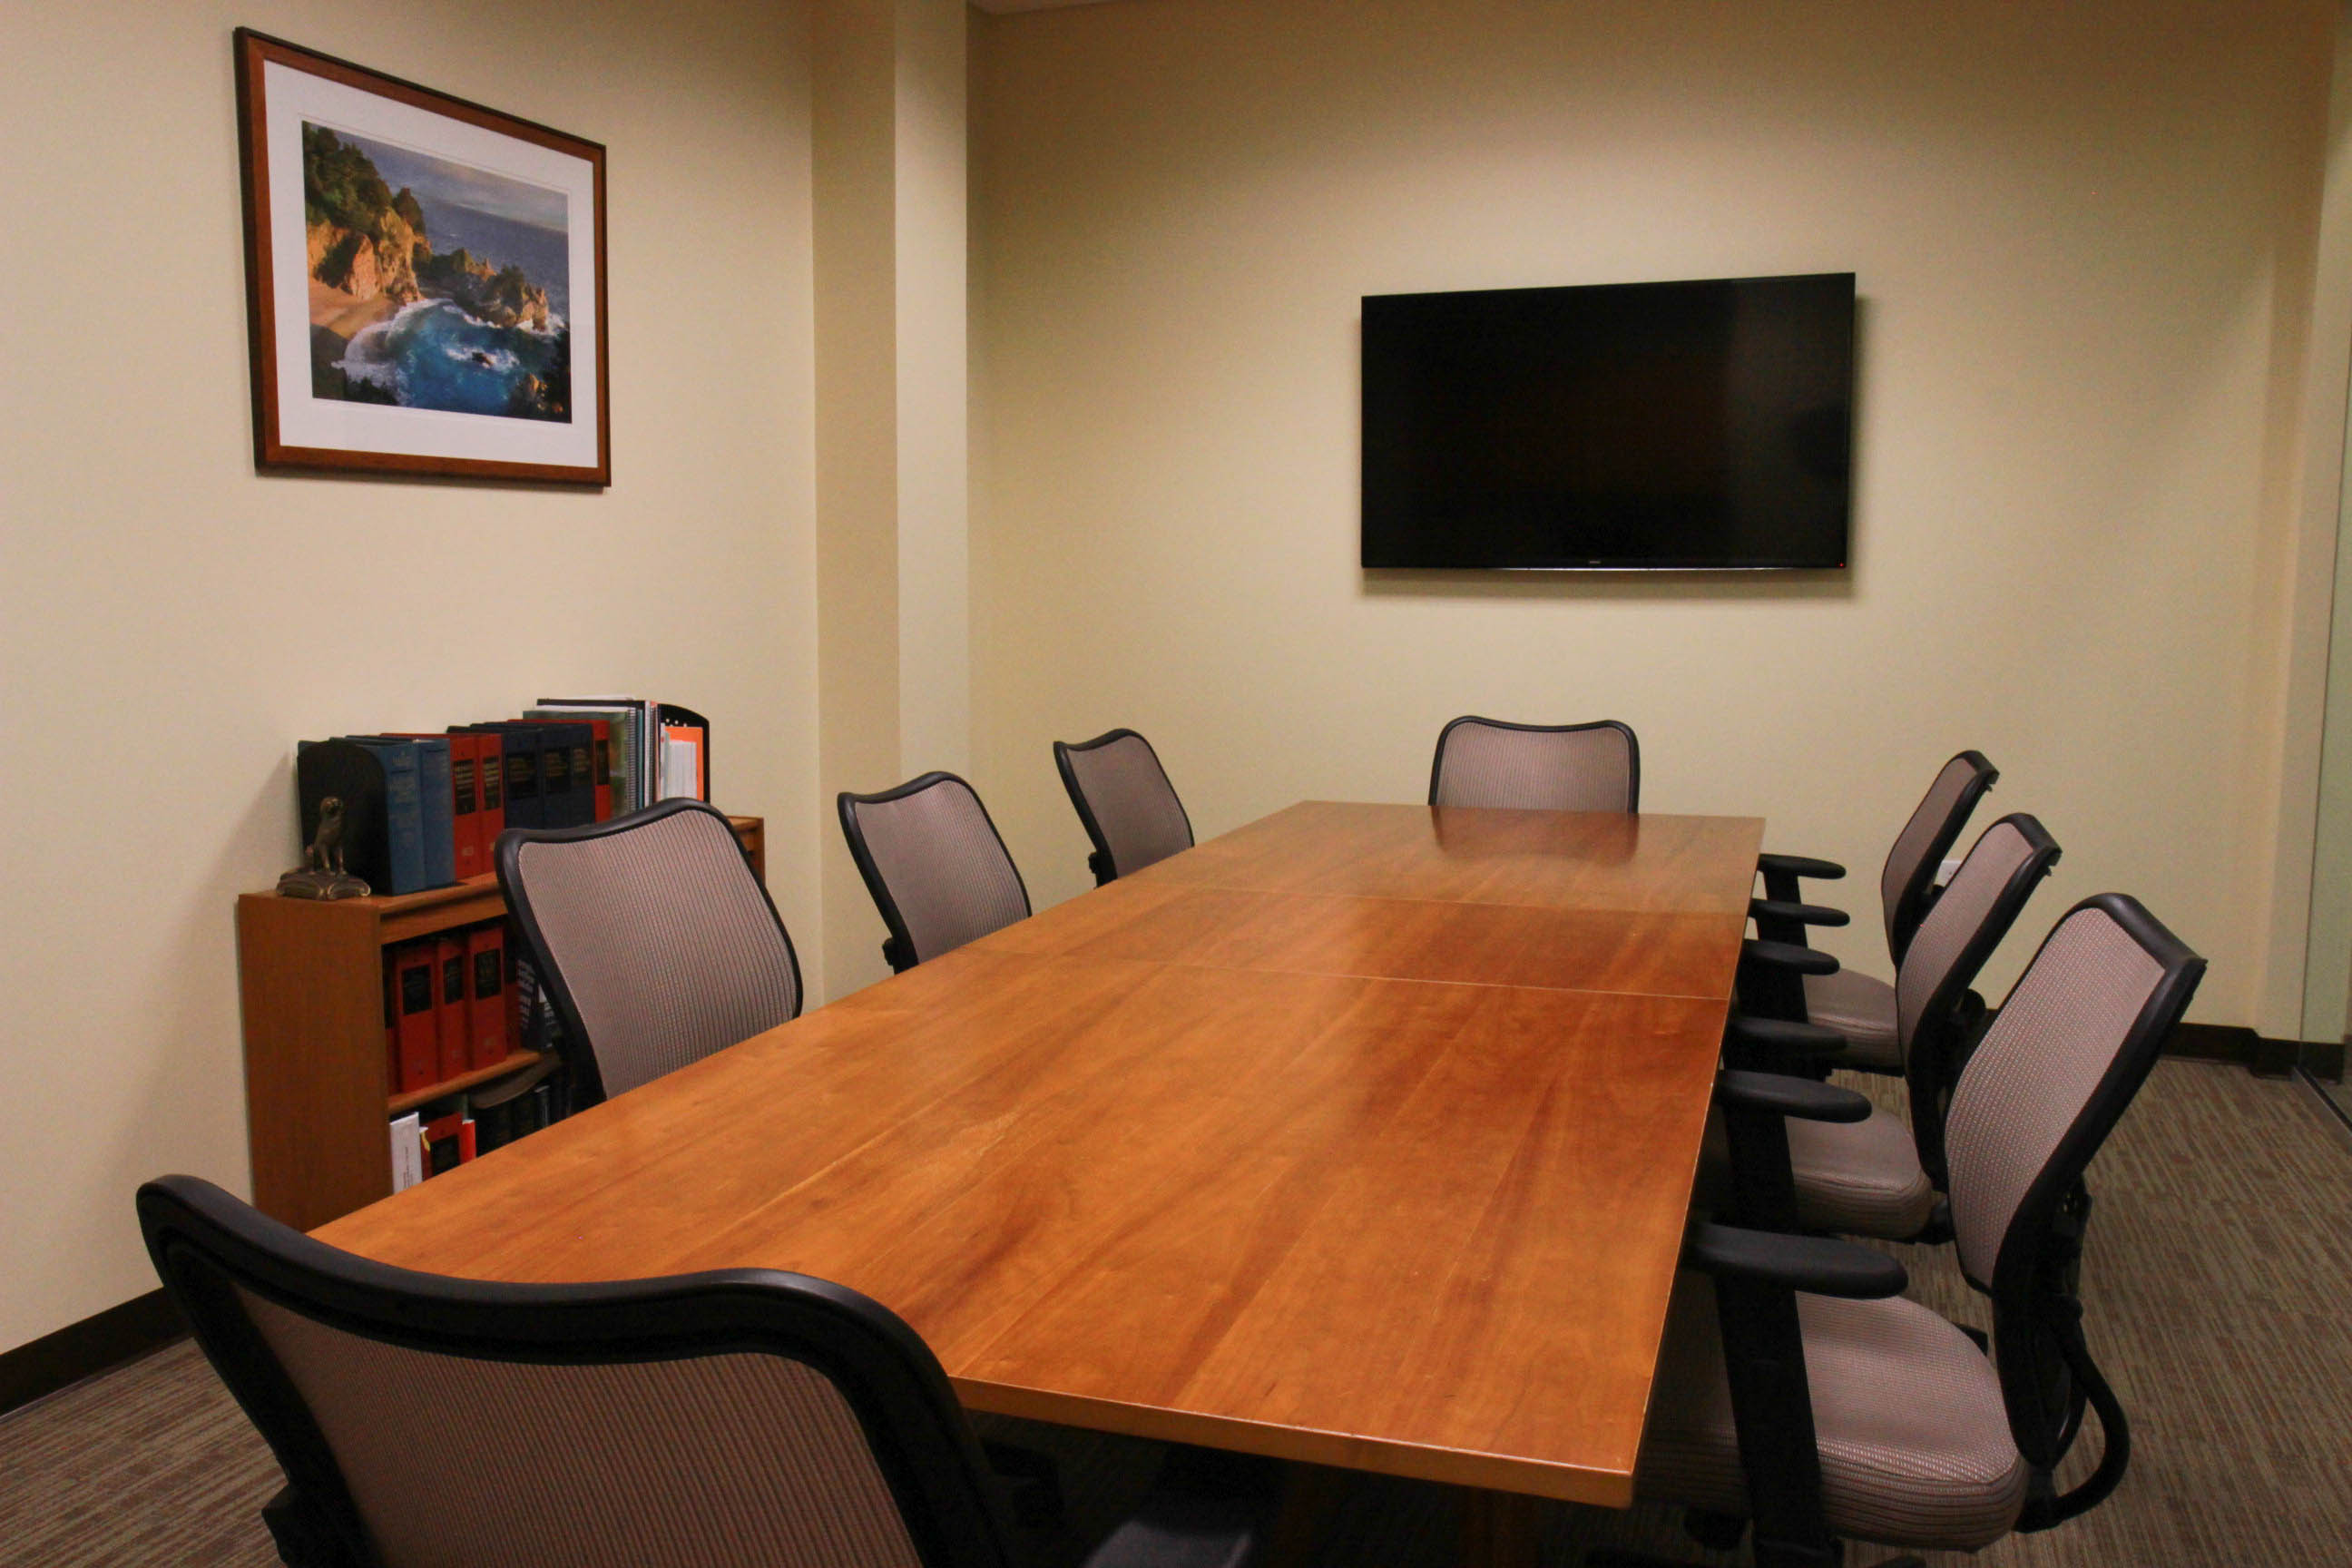 A conference table in a law office where neutral workplace investigations take place